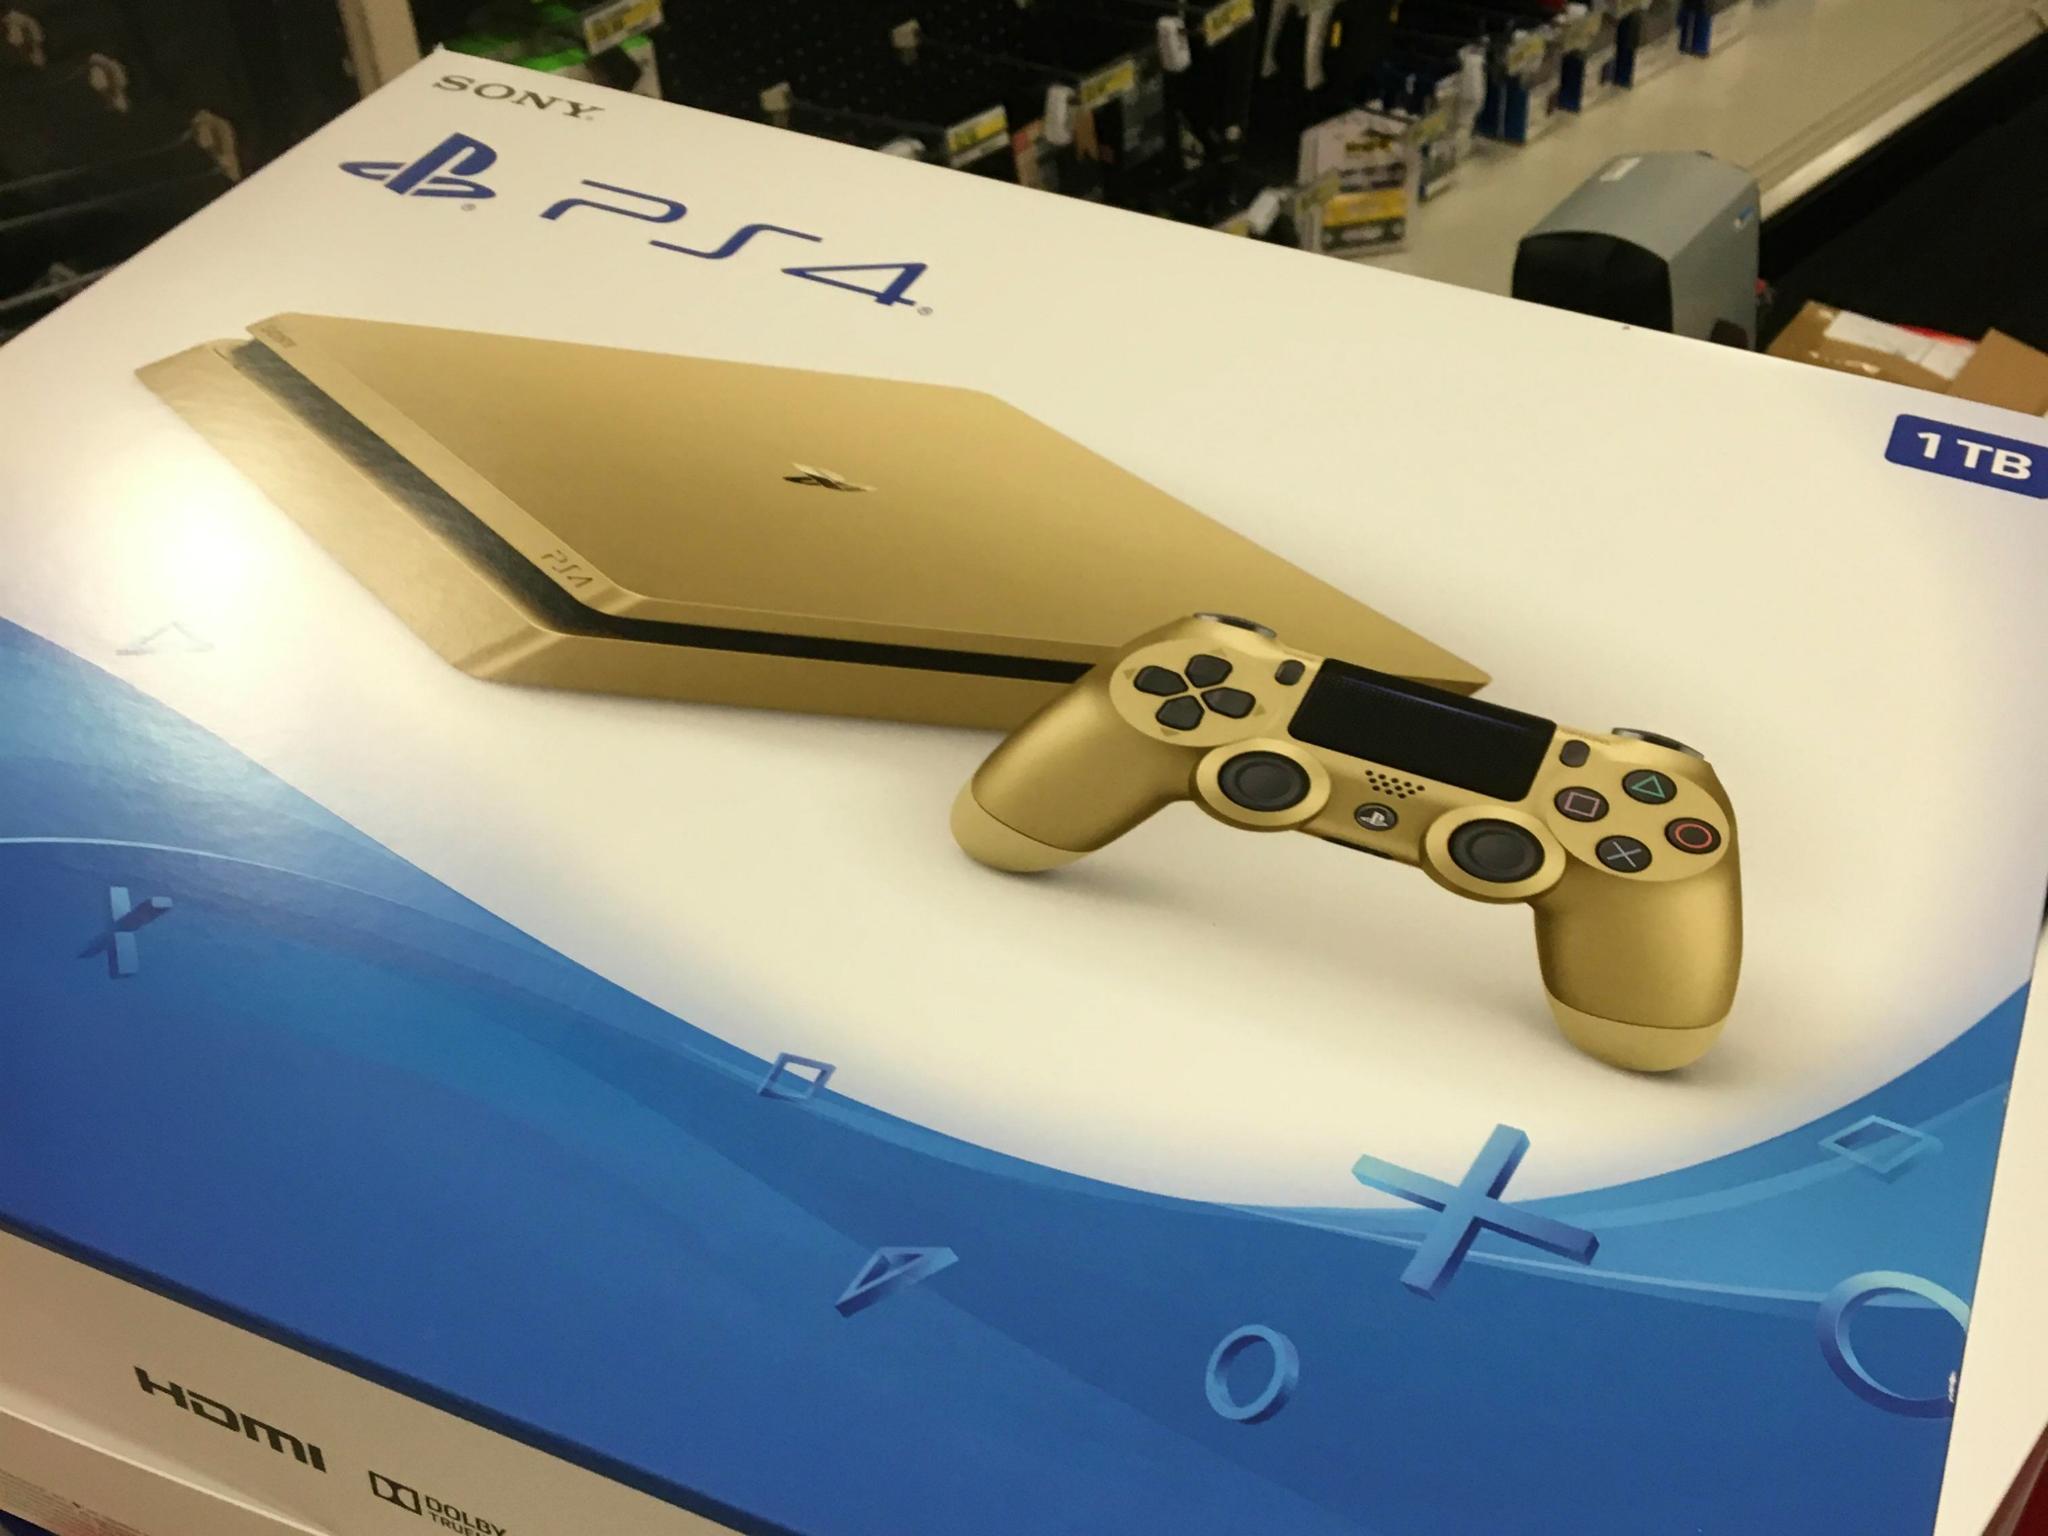 Different-coloured DualShock 4 controllers – one of which is the exact same shade of gold – have been available for some time